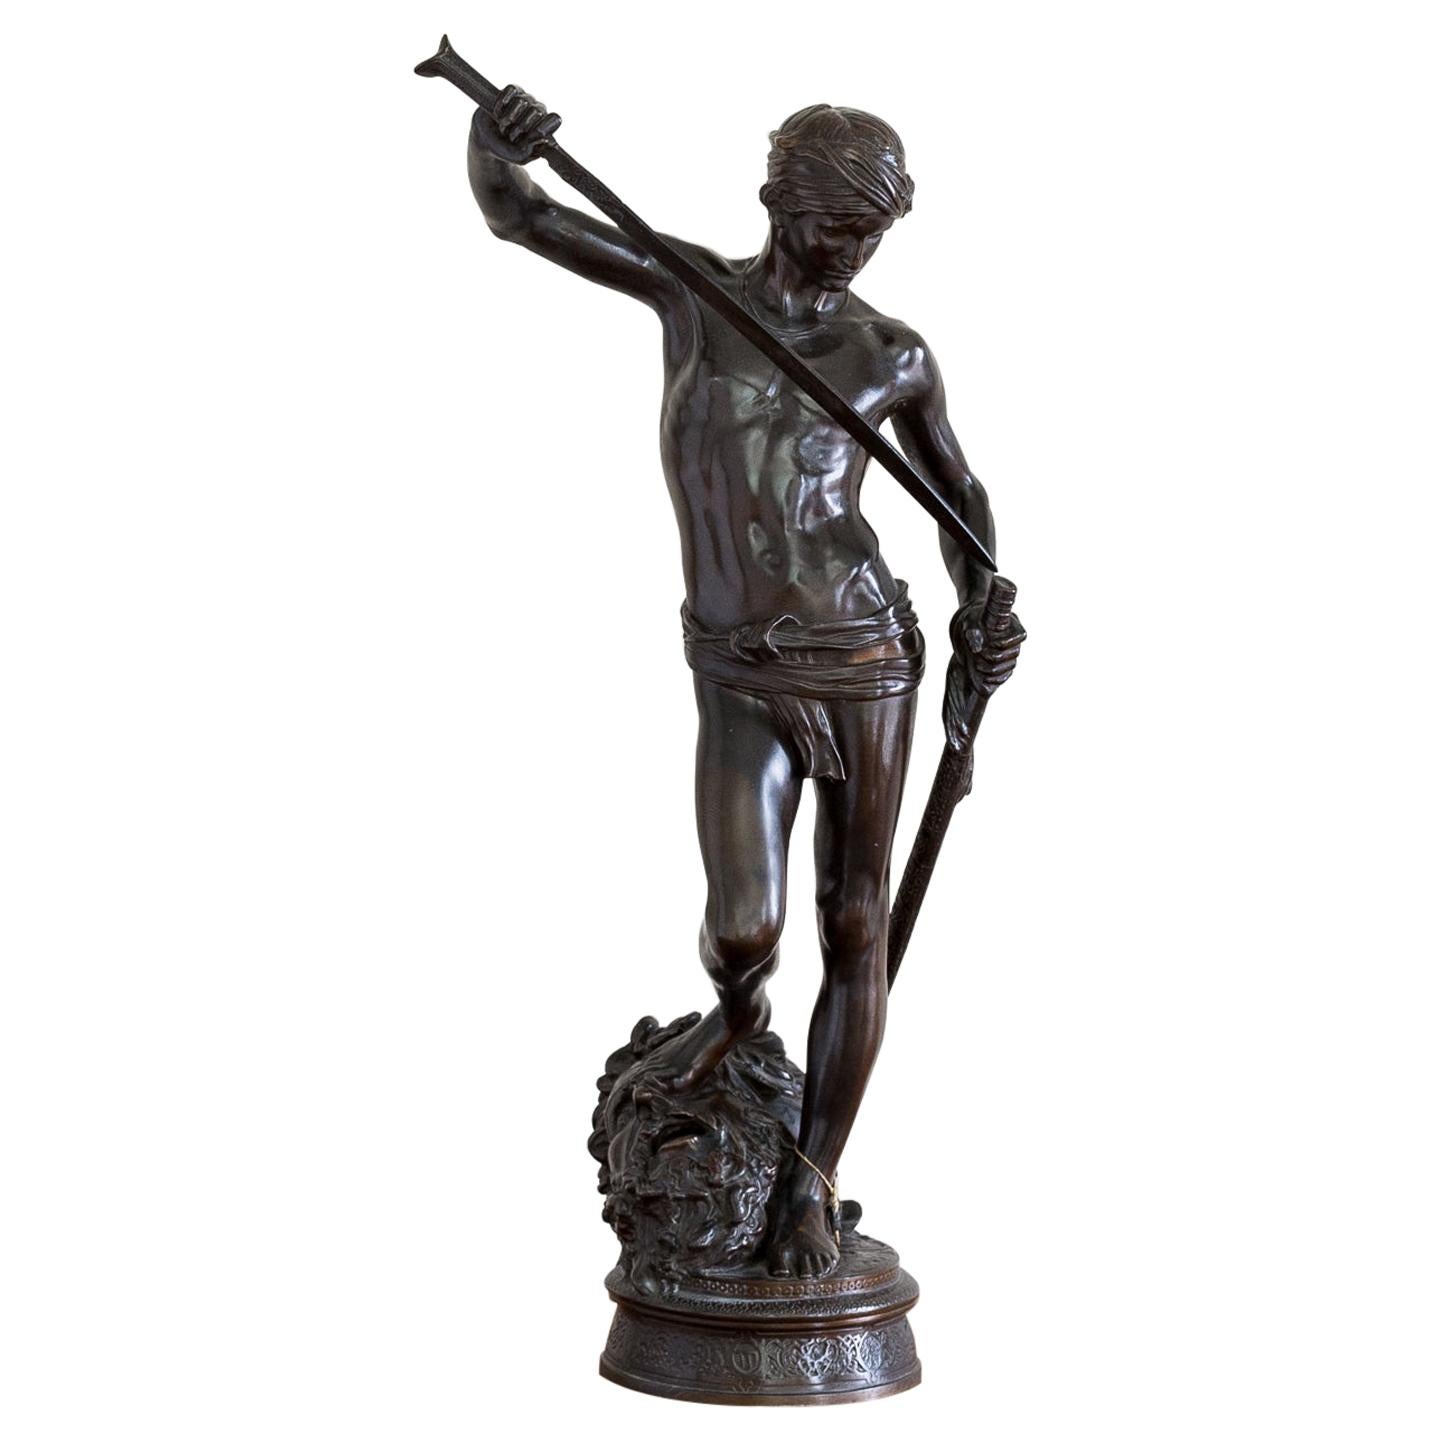 19th Century French Bronze of David Slaying Goliath by Barbedienne